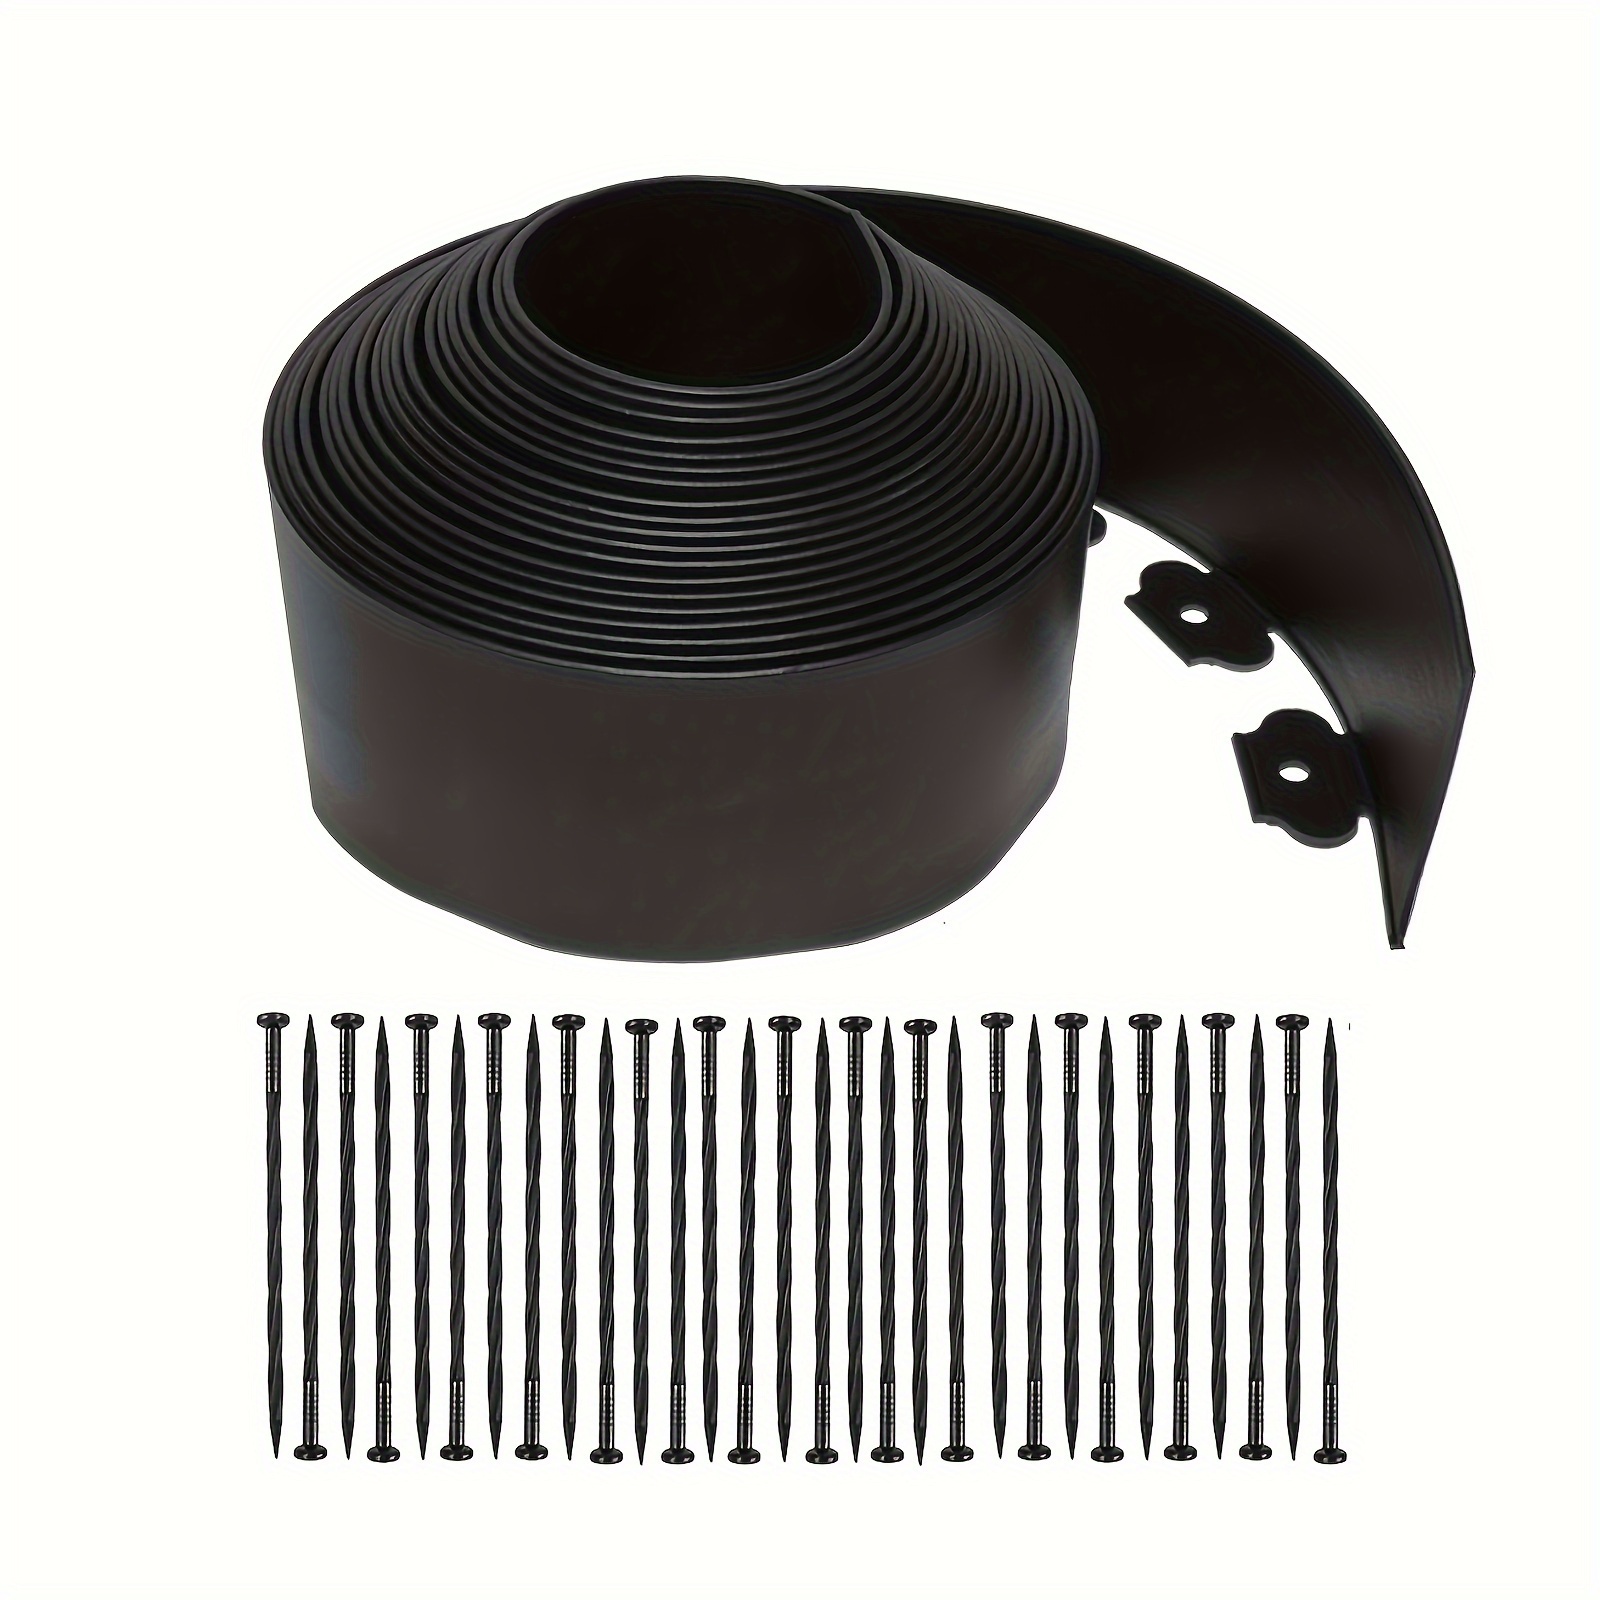 

Easy-install 32.8ft No-dig Garden Edging Kit With 30 Stakes - Durable Plastic, 4" Tall - Perfect For Yards & Flower Gardens